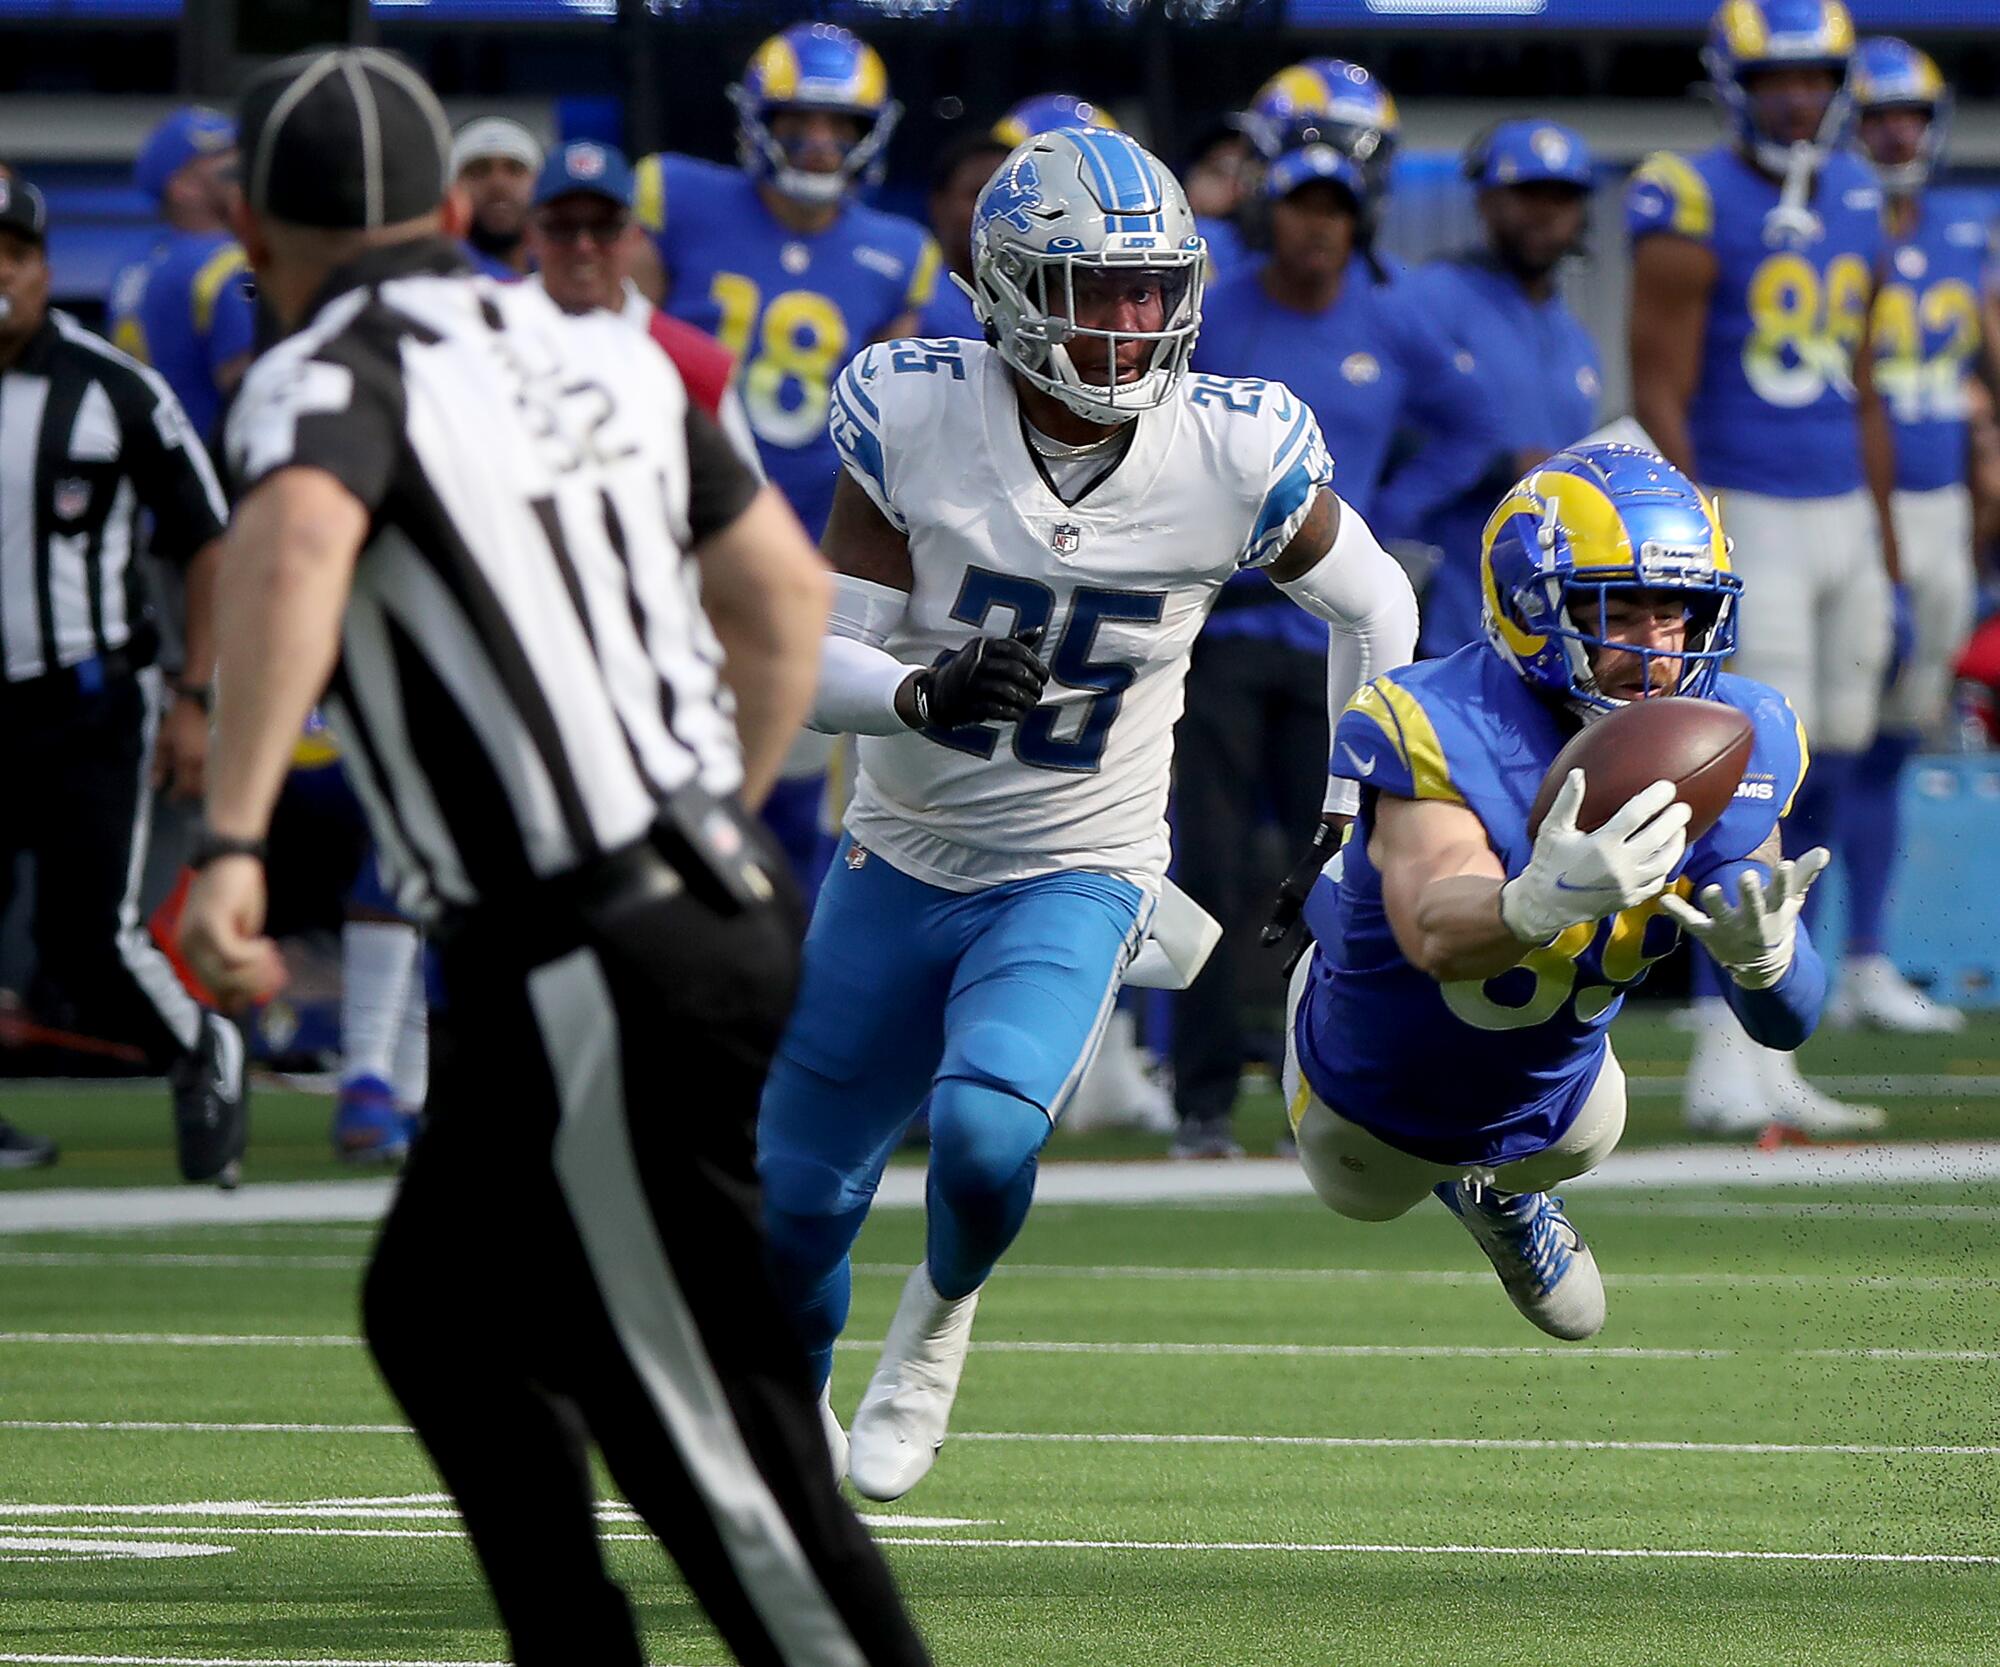 Rams tight end Tyler Higbee stretches out to catch a pass in front of Lions safety Will Harris in the fourth quarter.